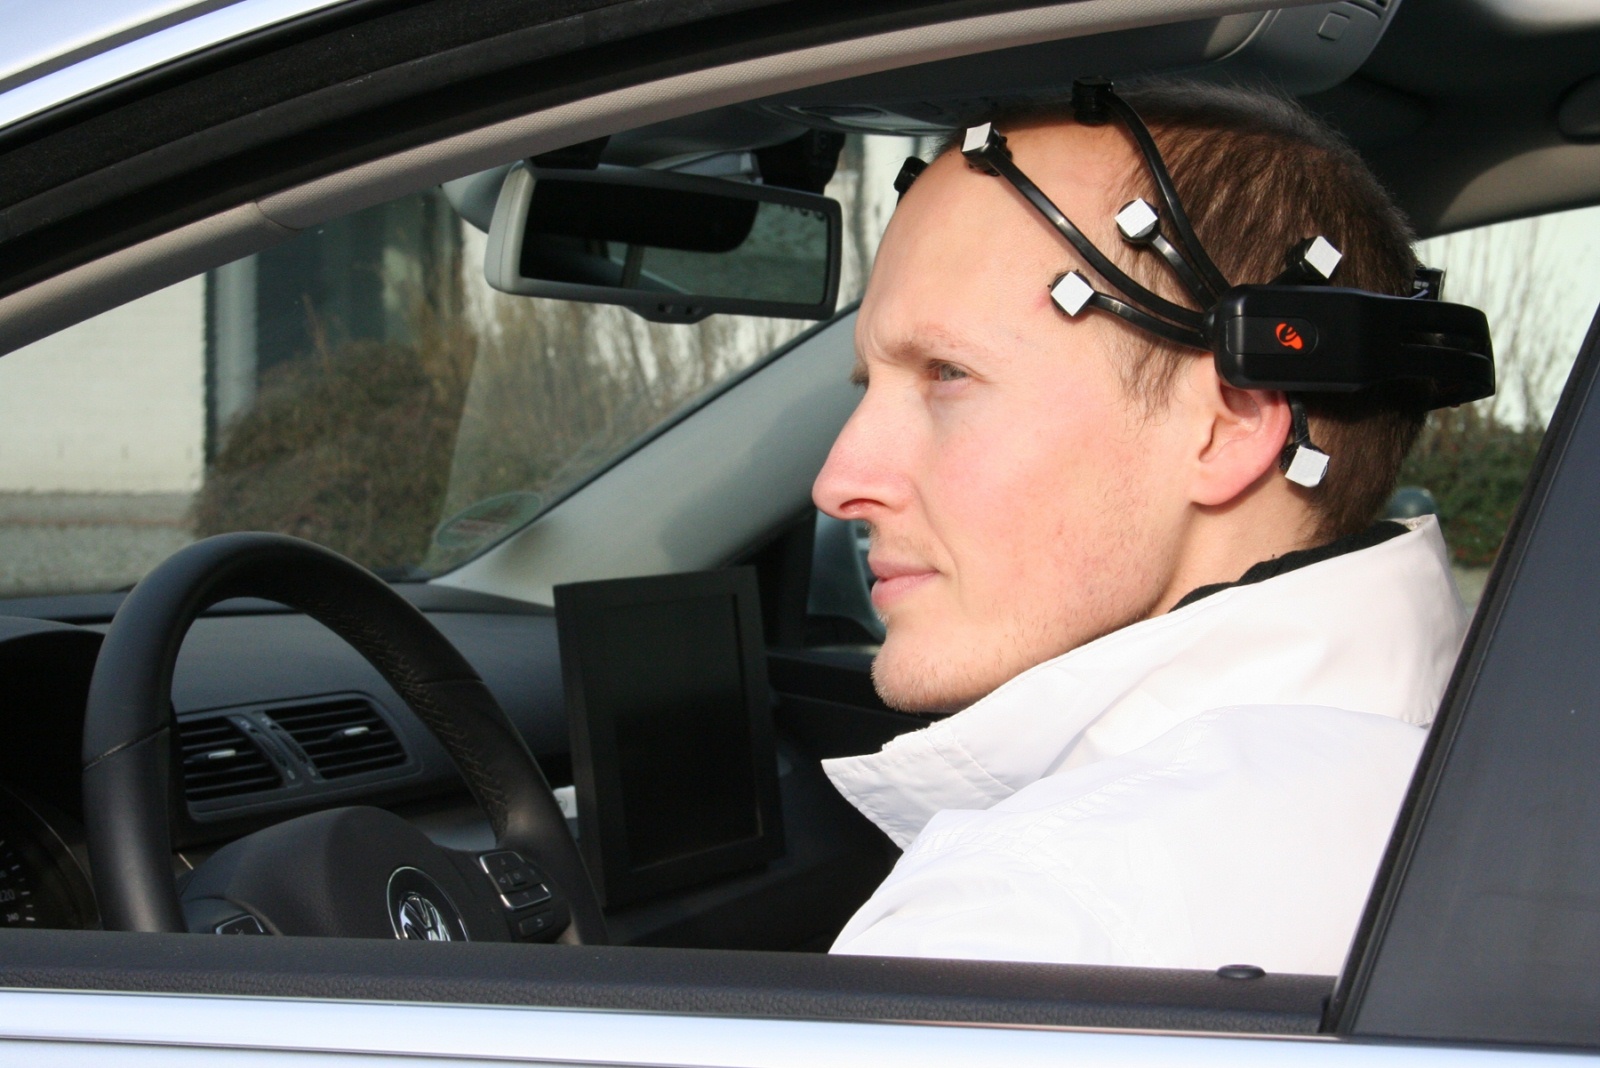 Brain controlled car steers, accelerates, brakes